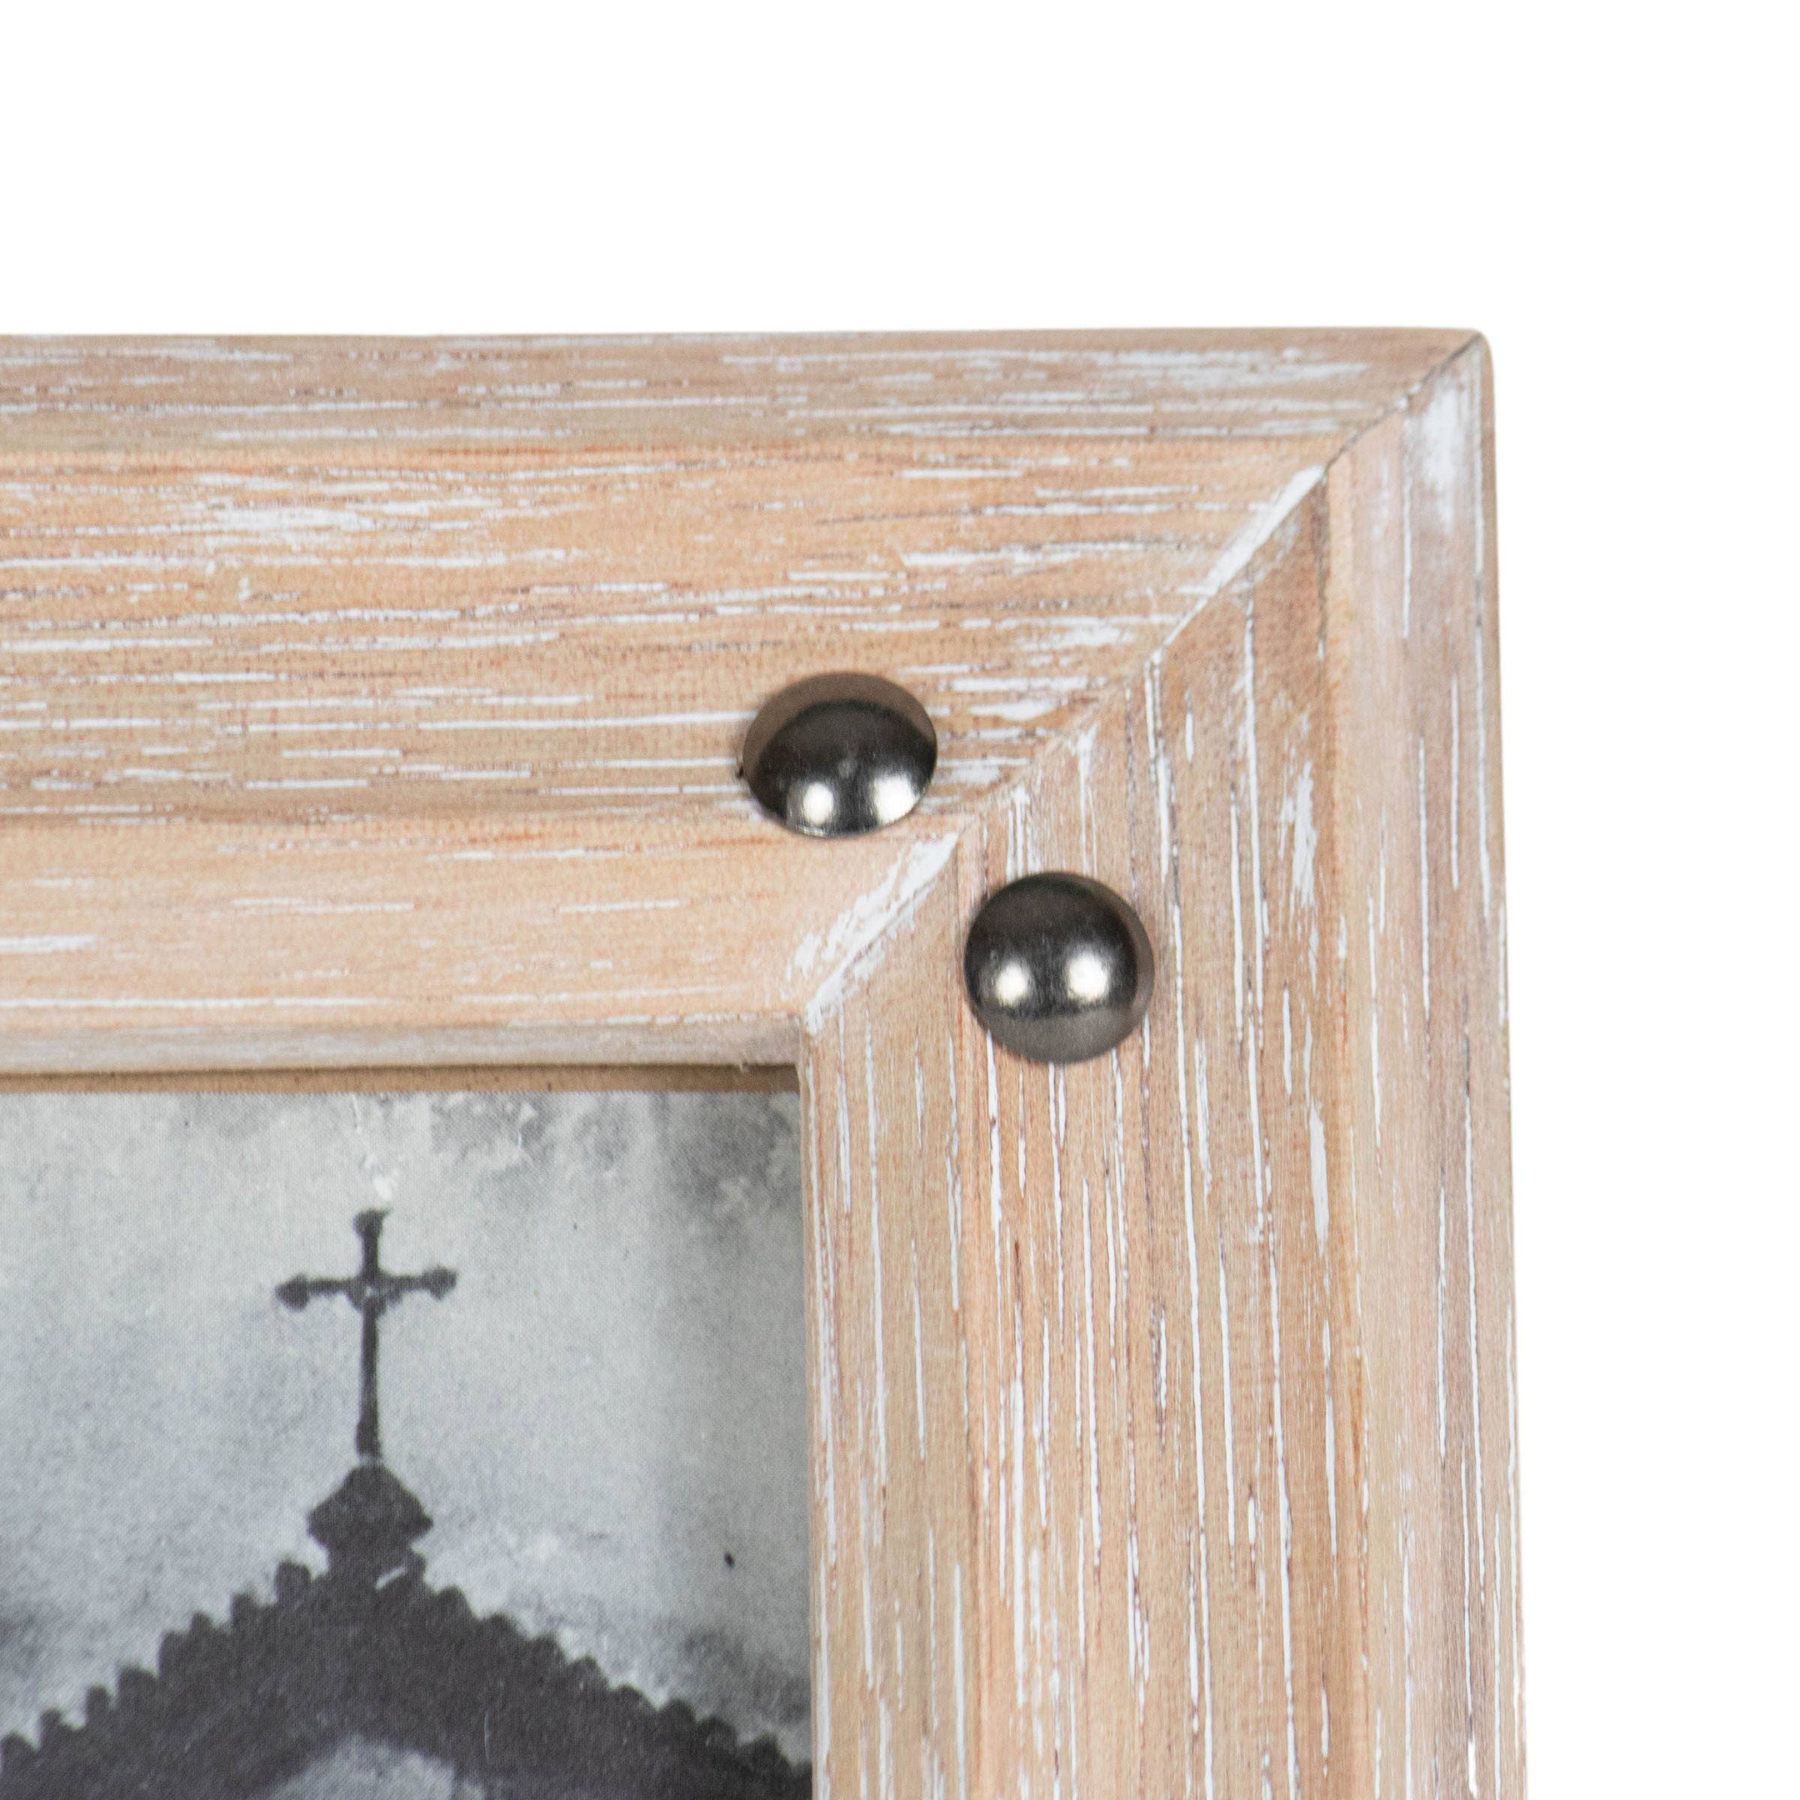 Whitewashed Wood Picture Frame Details